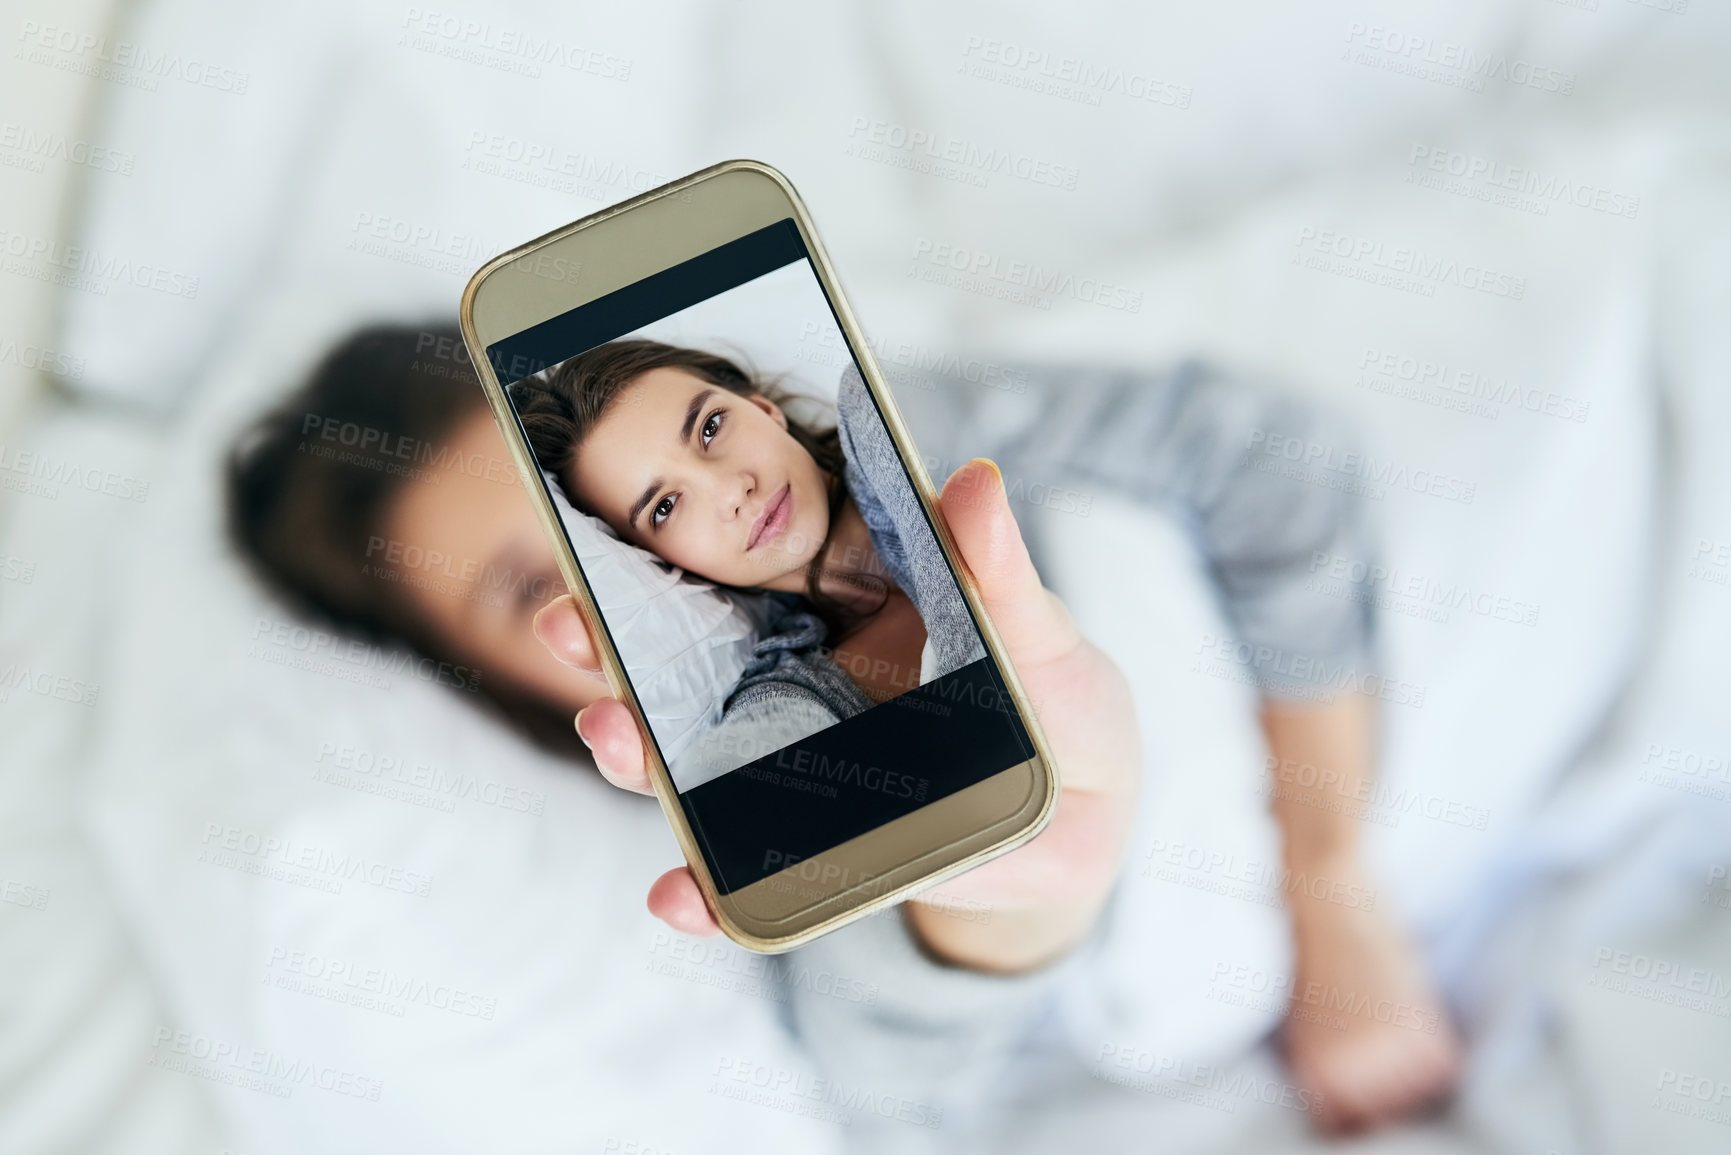 Buy stock photo Shot of an attractive young woman taking a self portrait with her cellphone while lying in bed at home